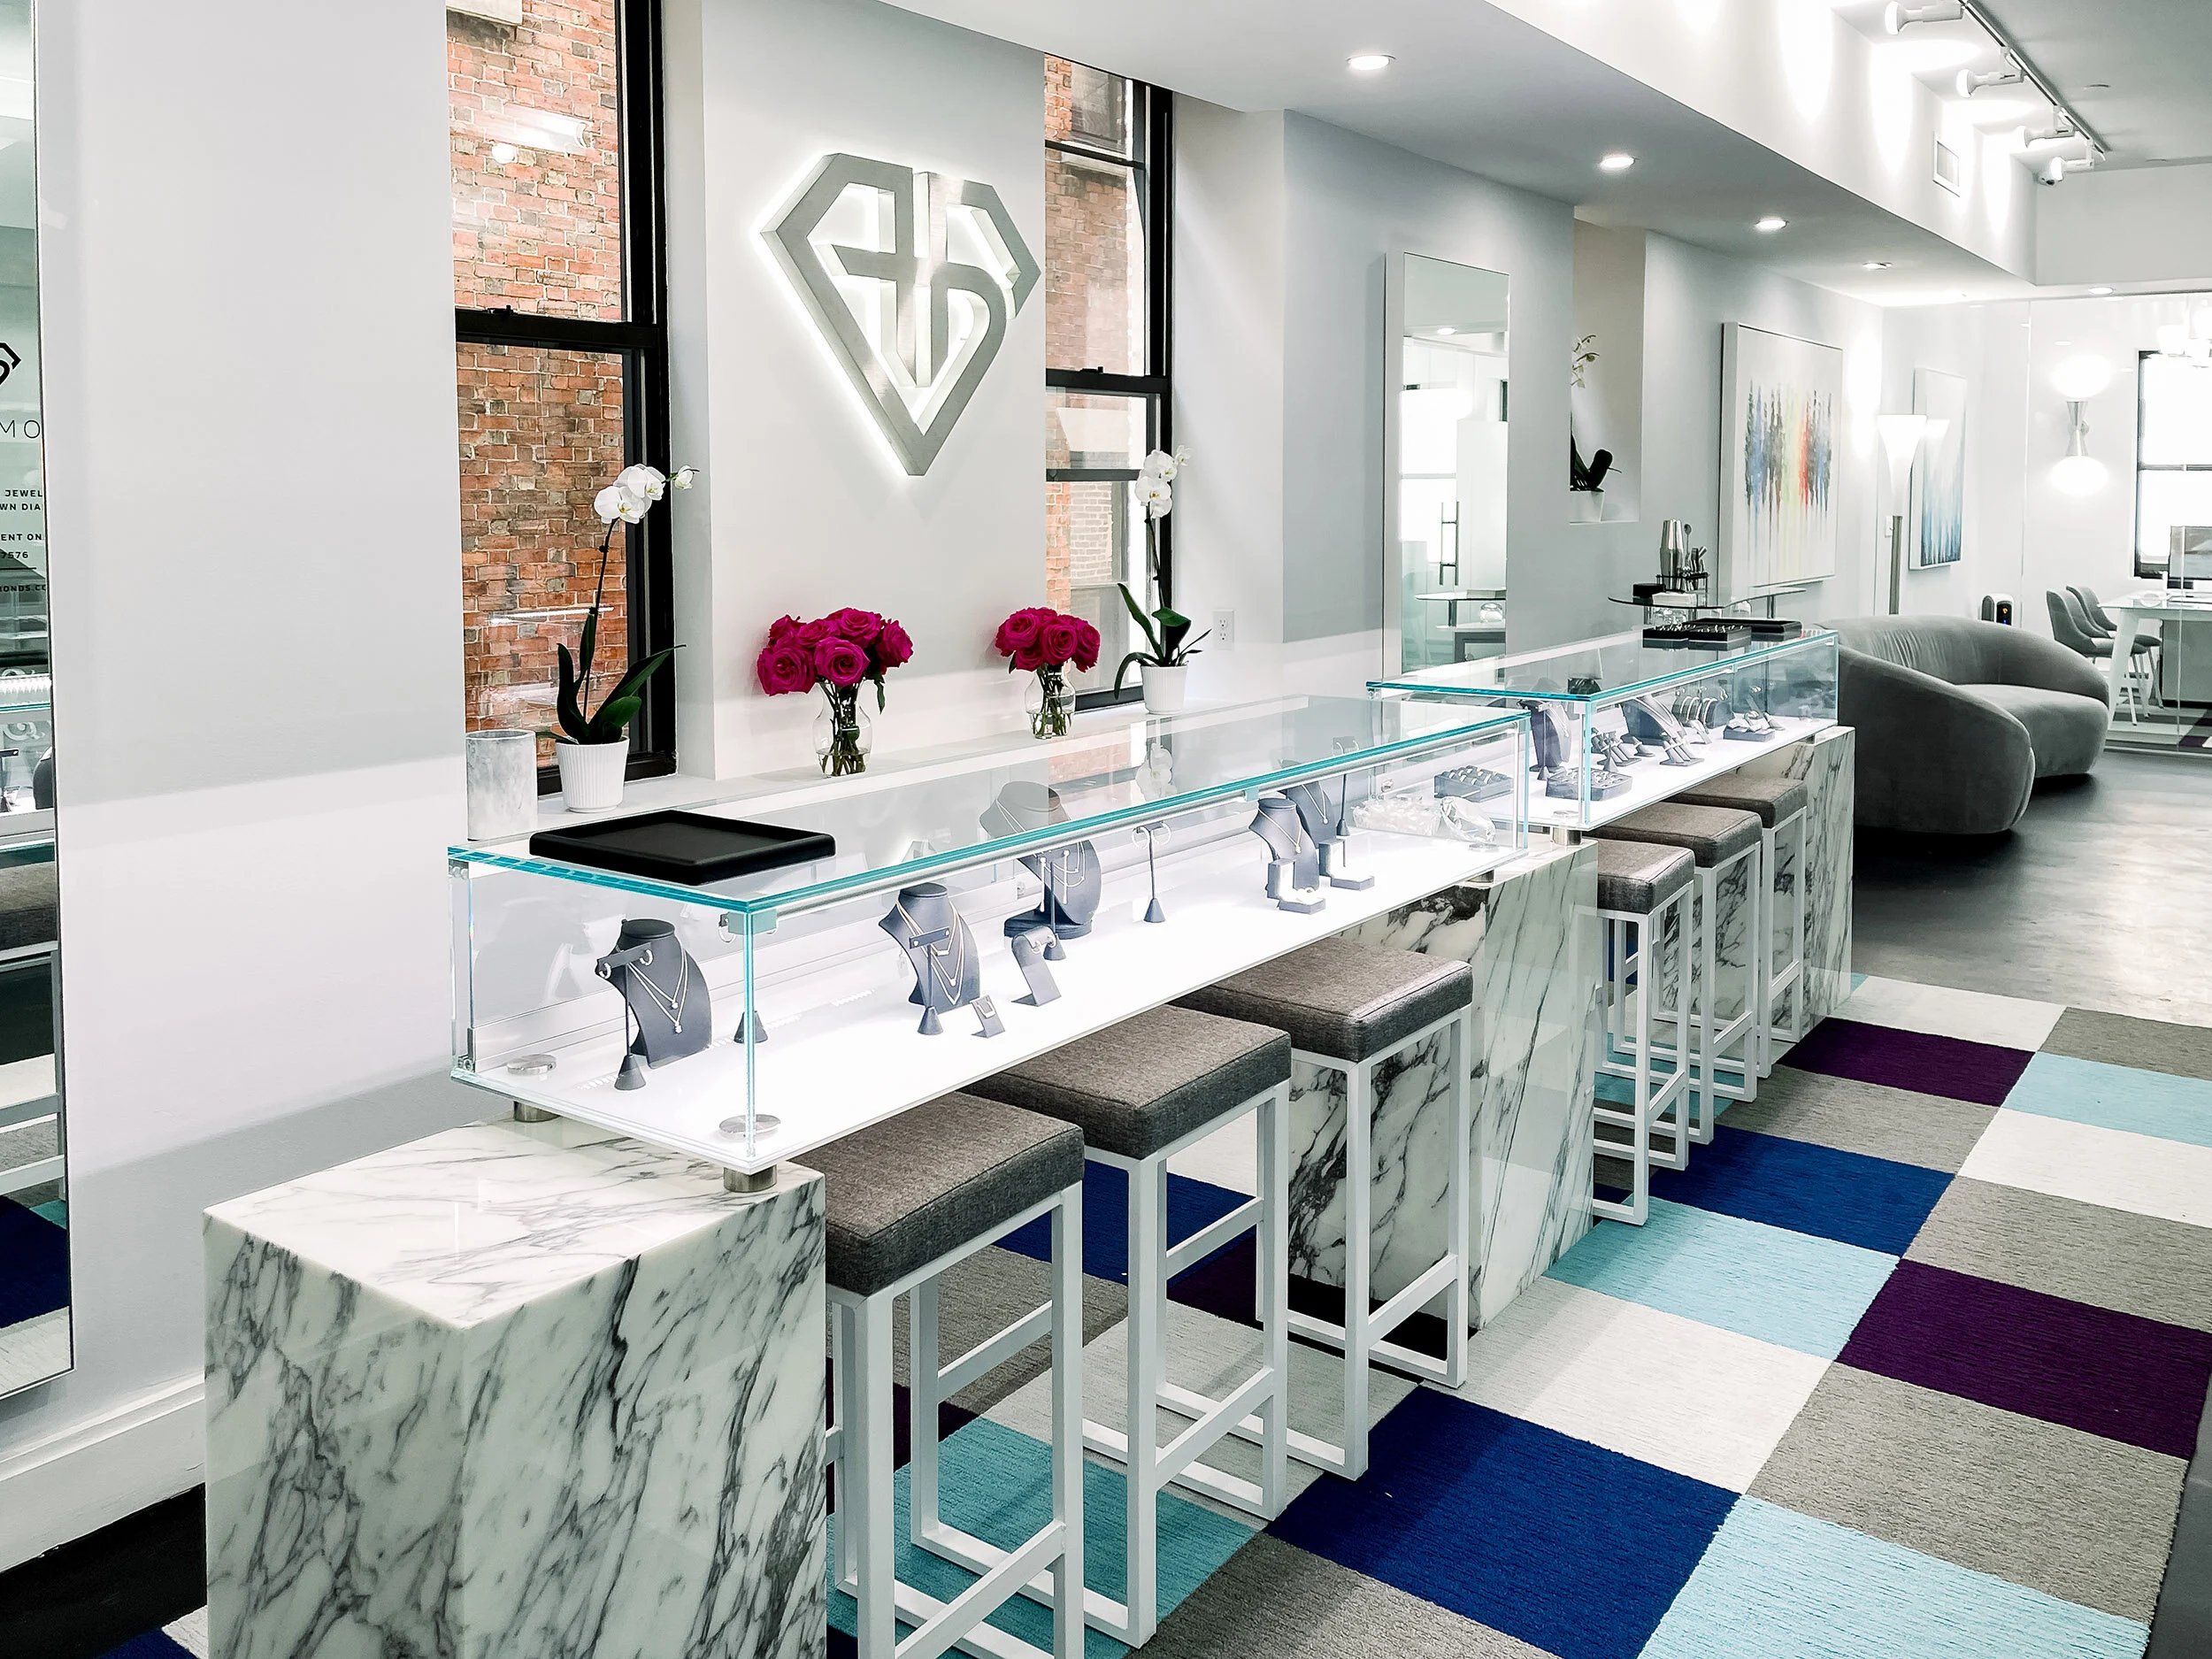 Link to learn more about Ada's showroom in New York City